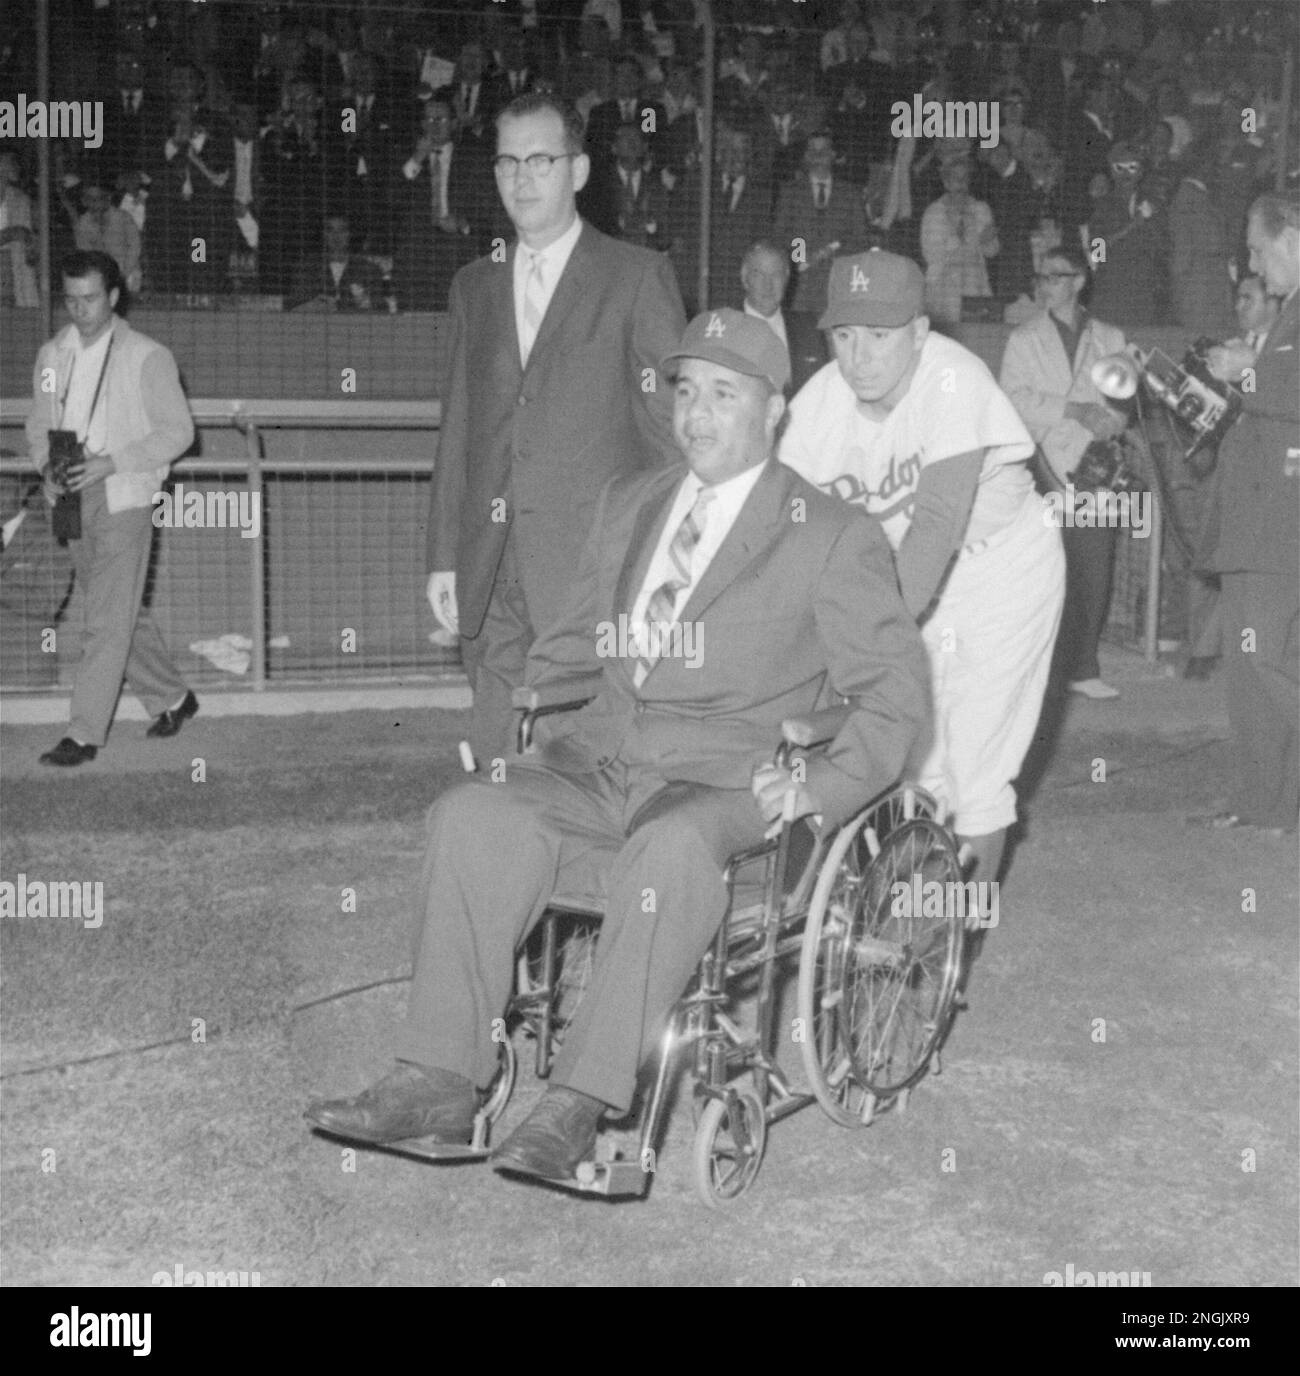 Pee Wee Reese, his old teammate, wheels Roy Campanella onto playing field  before Dodgers - Yankees exhibition in Los Angeles Coliseum May 7, 1959.  Game was in Campy's honor, and he was